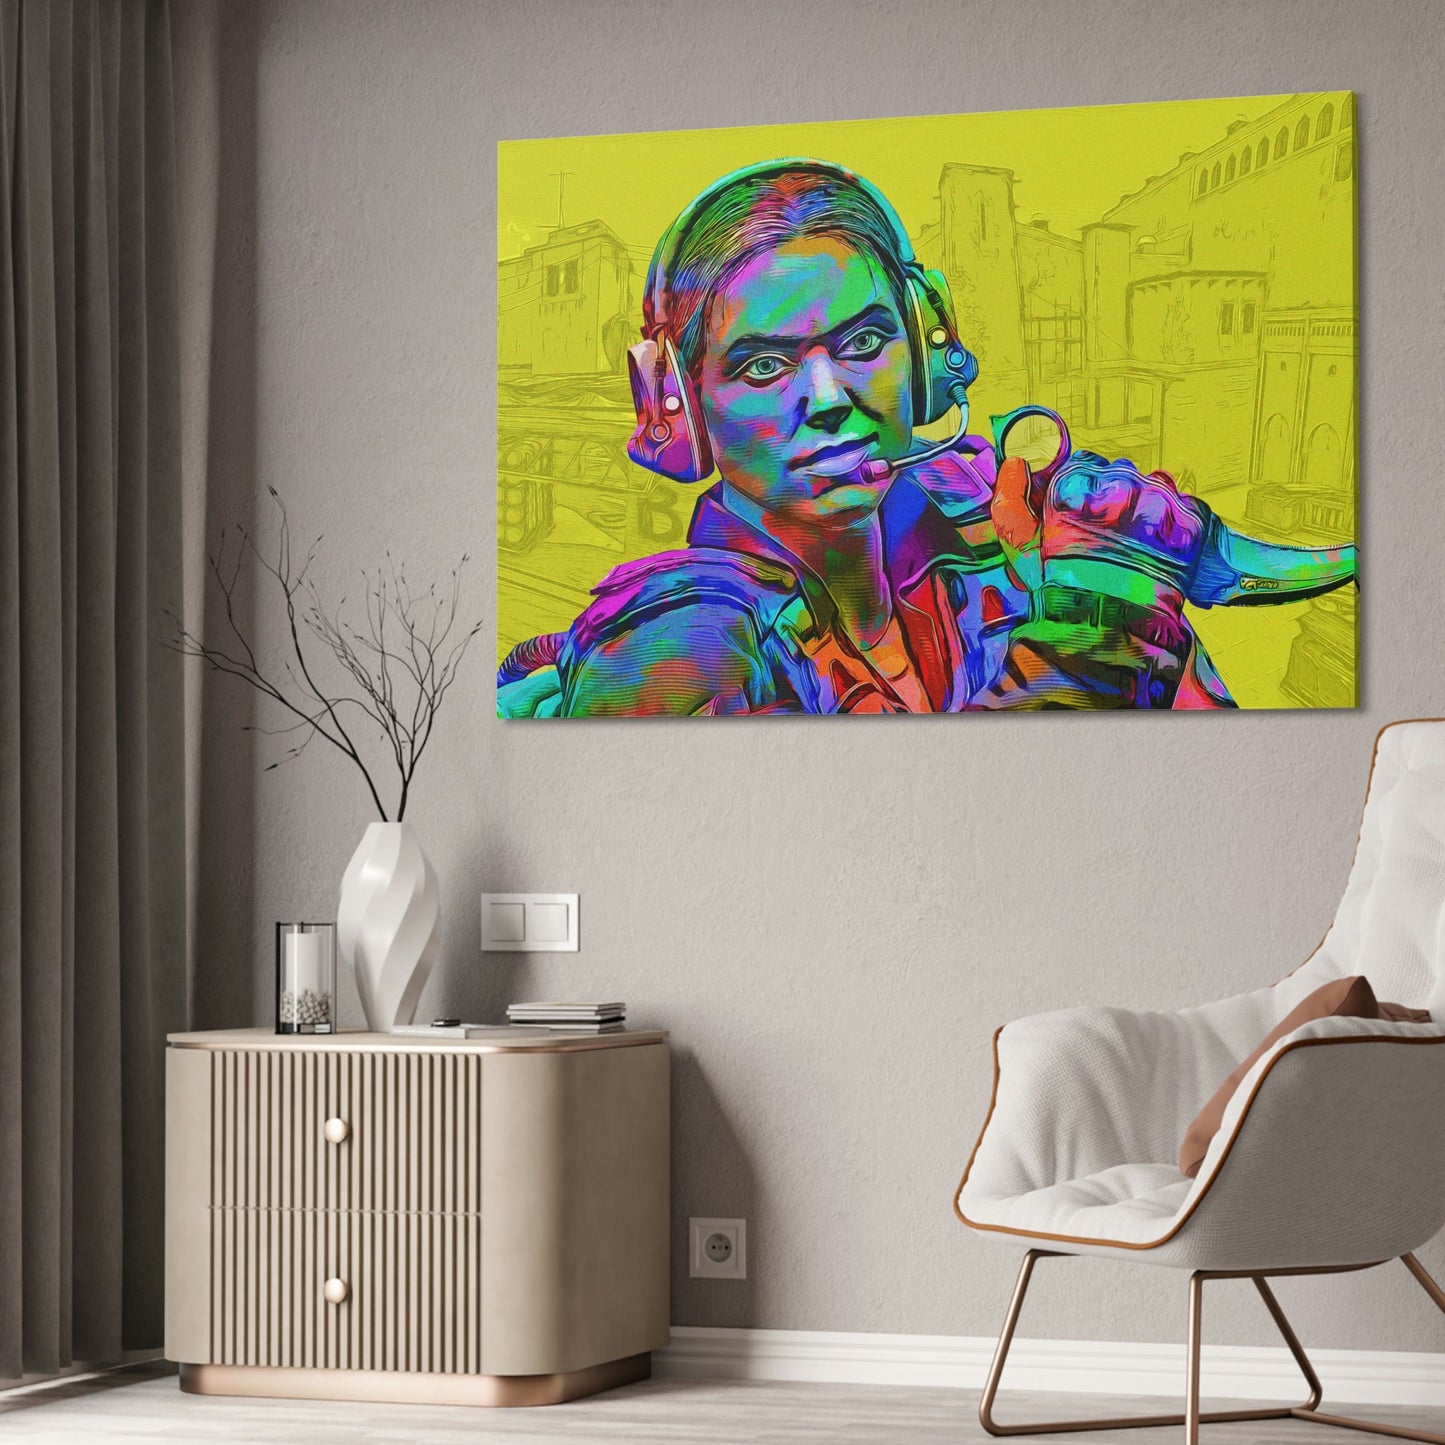 Fierce Competitors: Print on Canvas with Counter Strike Wall Art